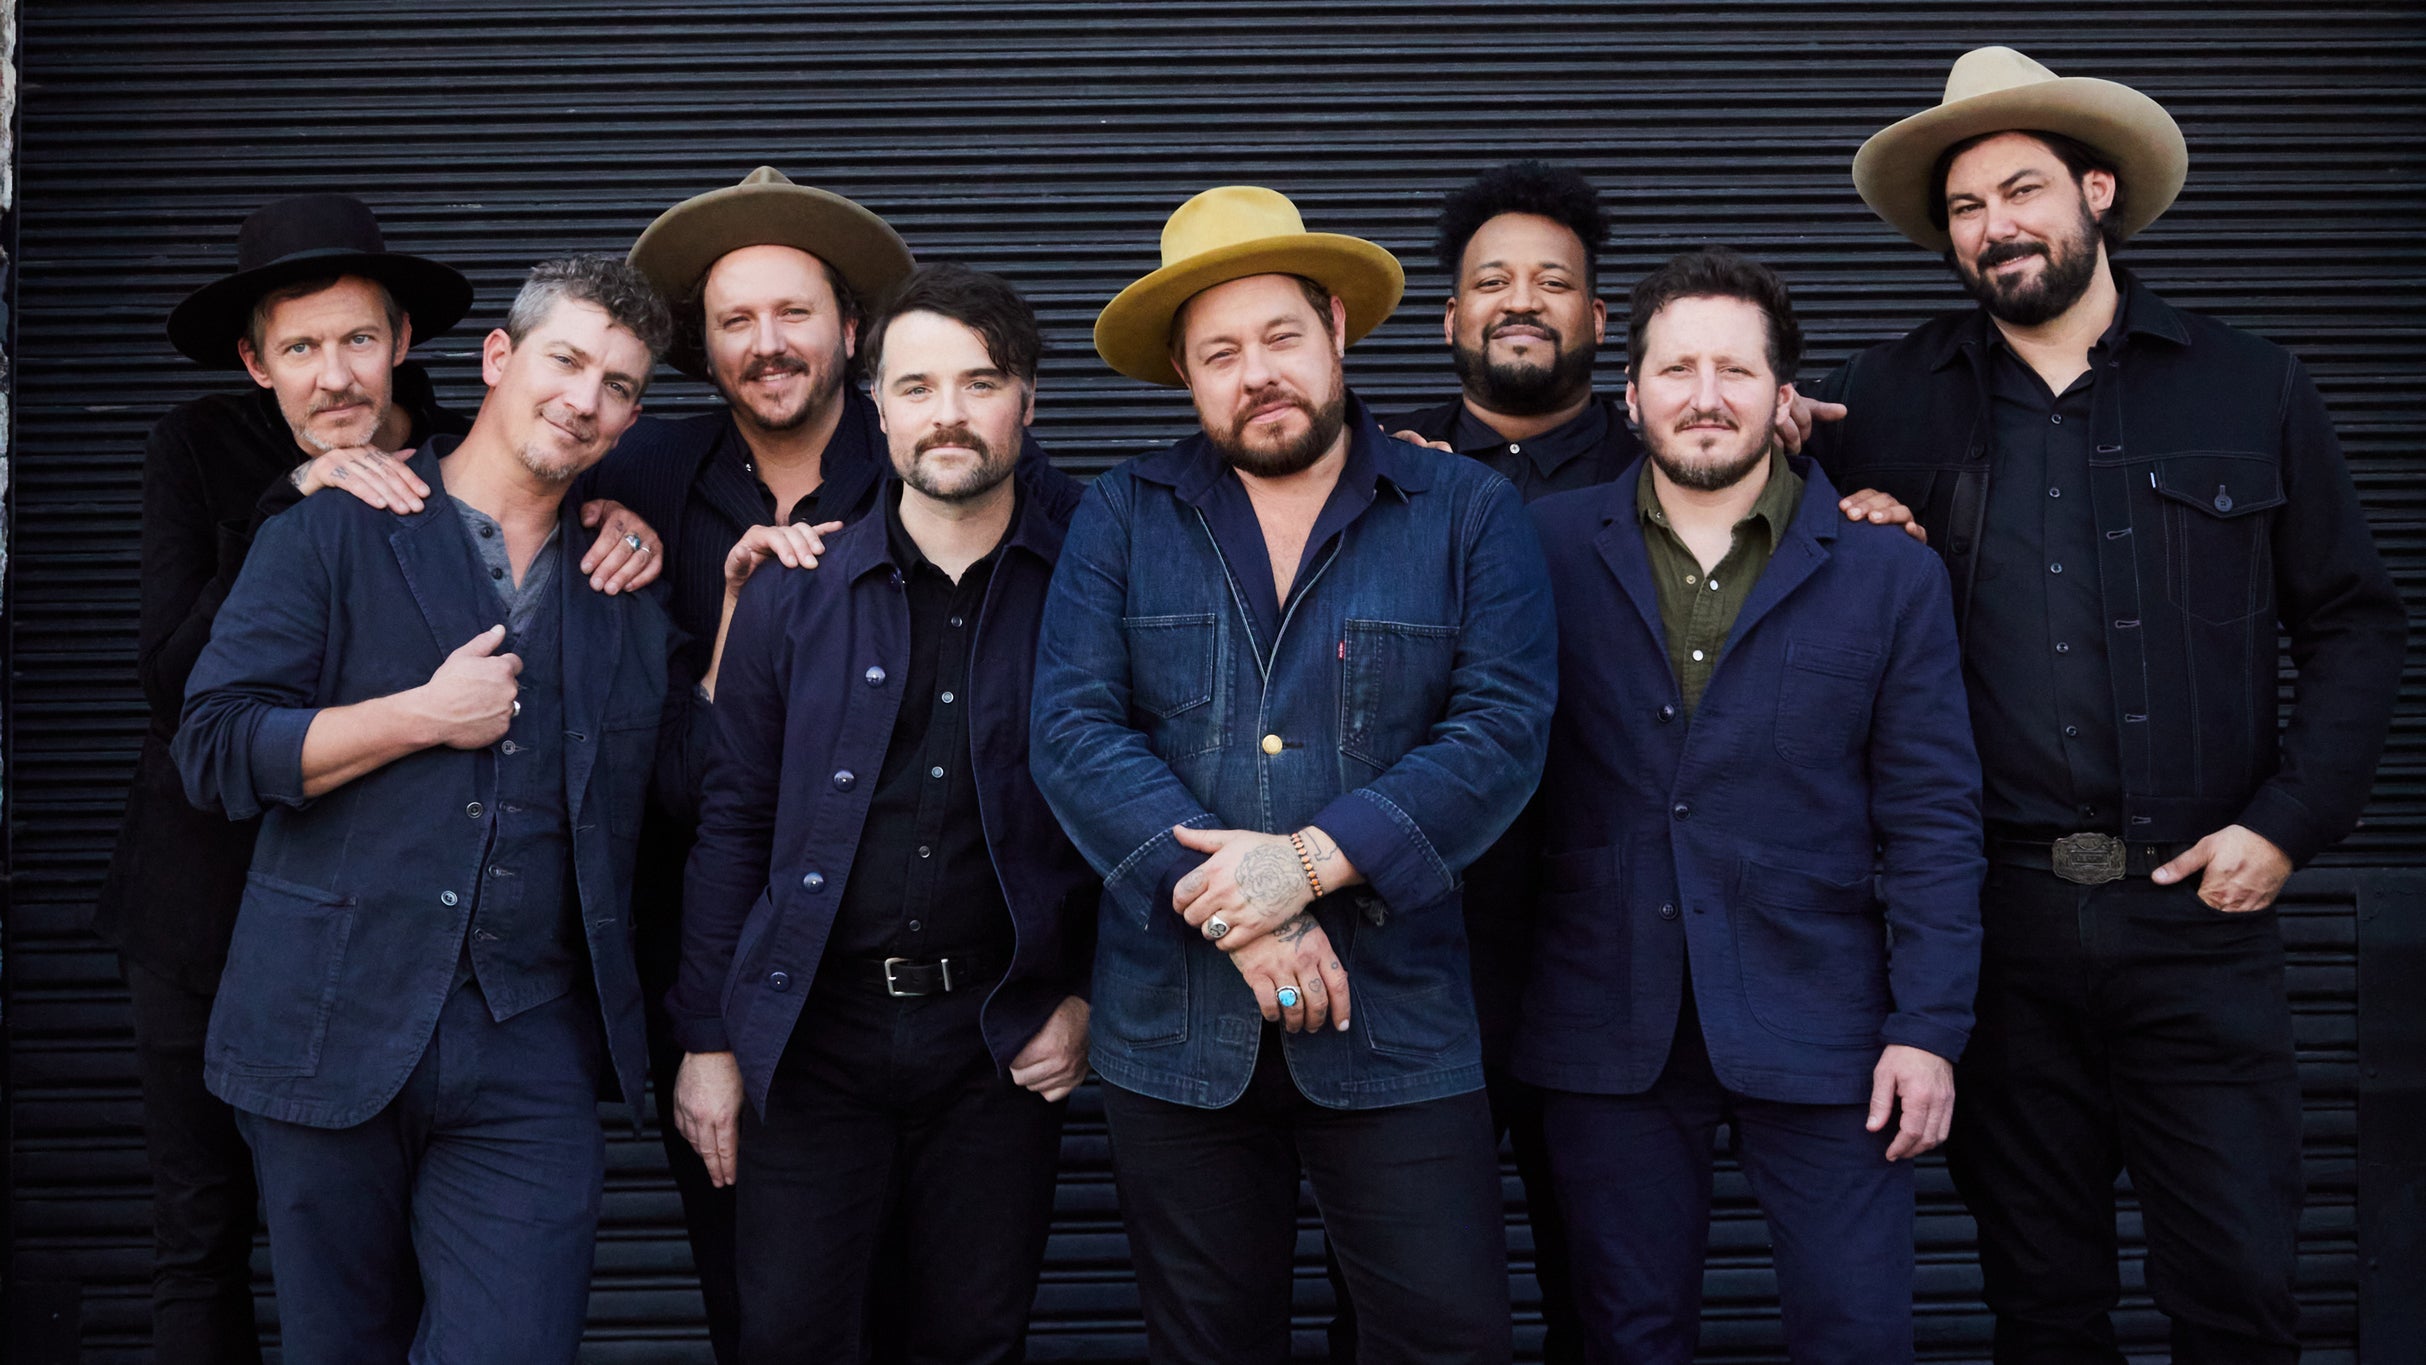 Eye To Eye Tour - Nathaniel Rateliff & TNS and My Morning Jacket presale code for early tickets in Nashville